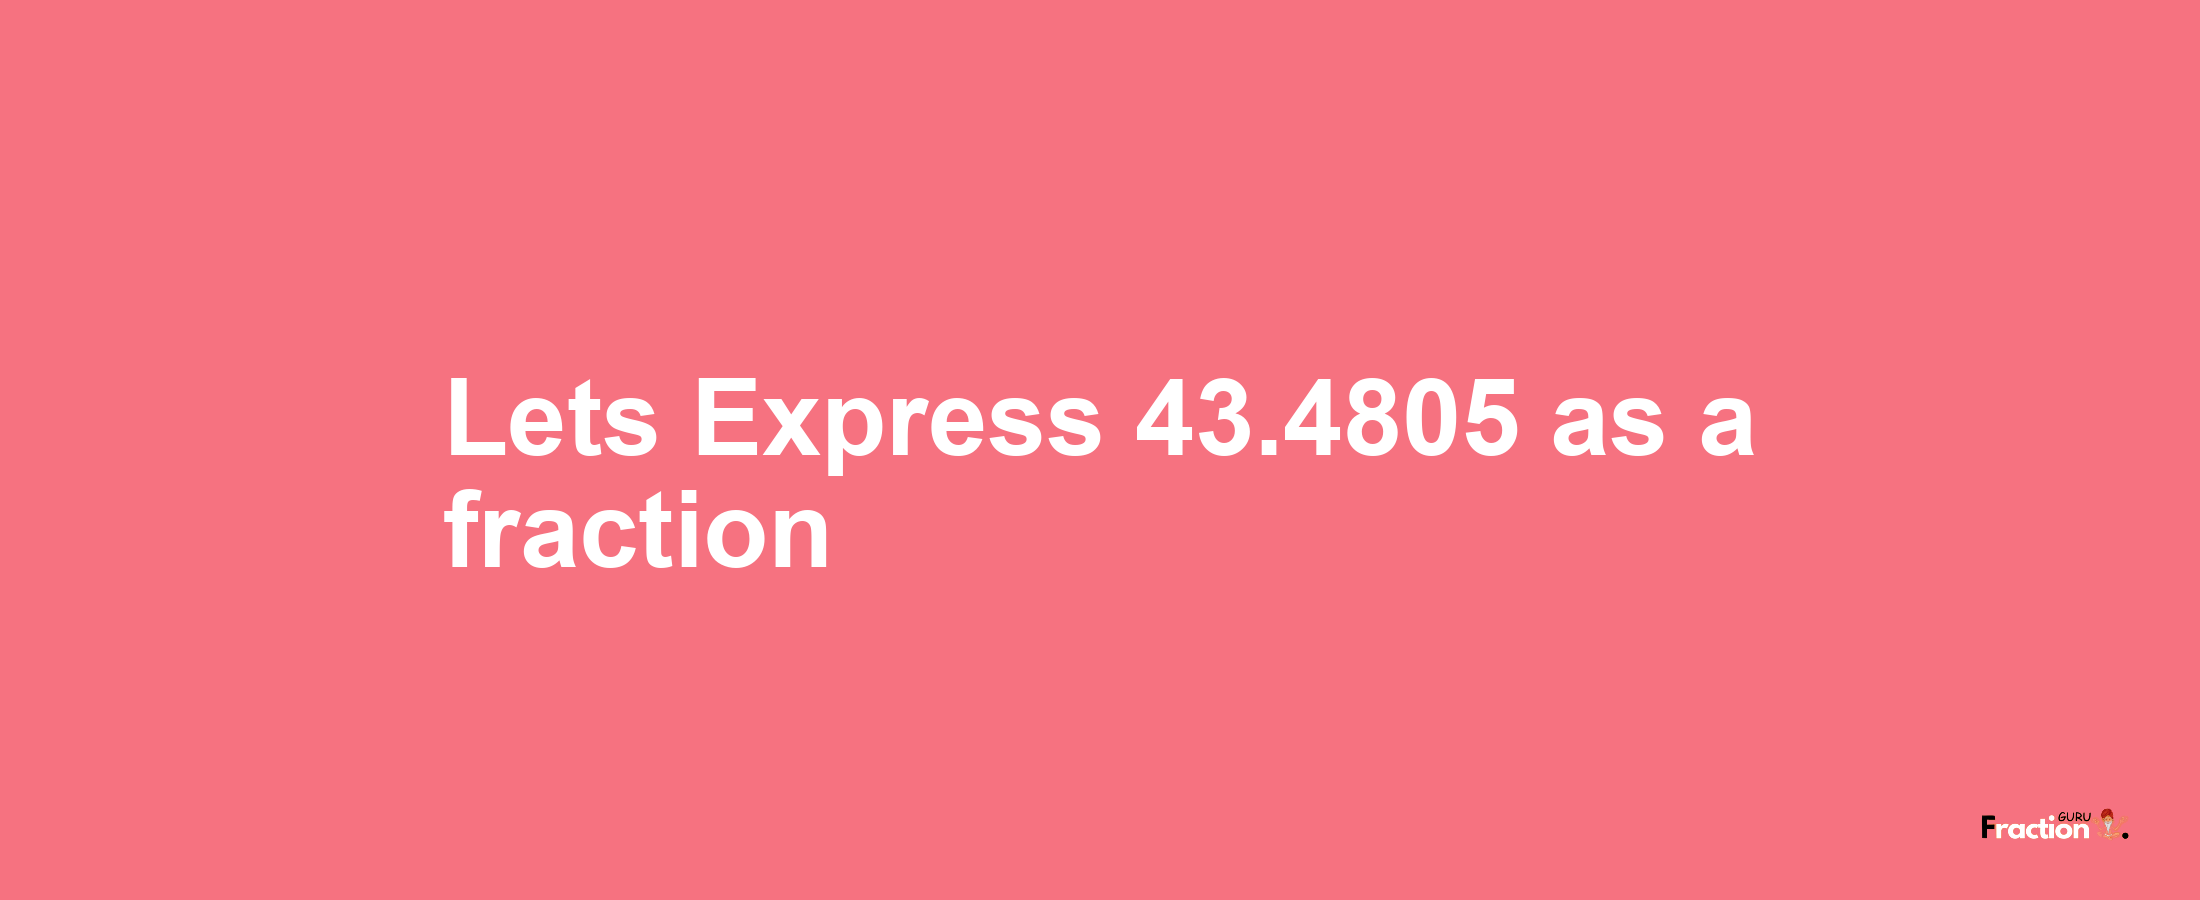 Lets Express 43.4805 as afraction